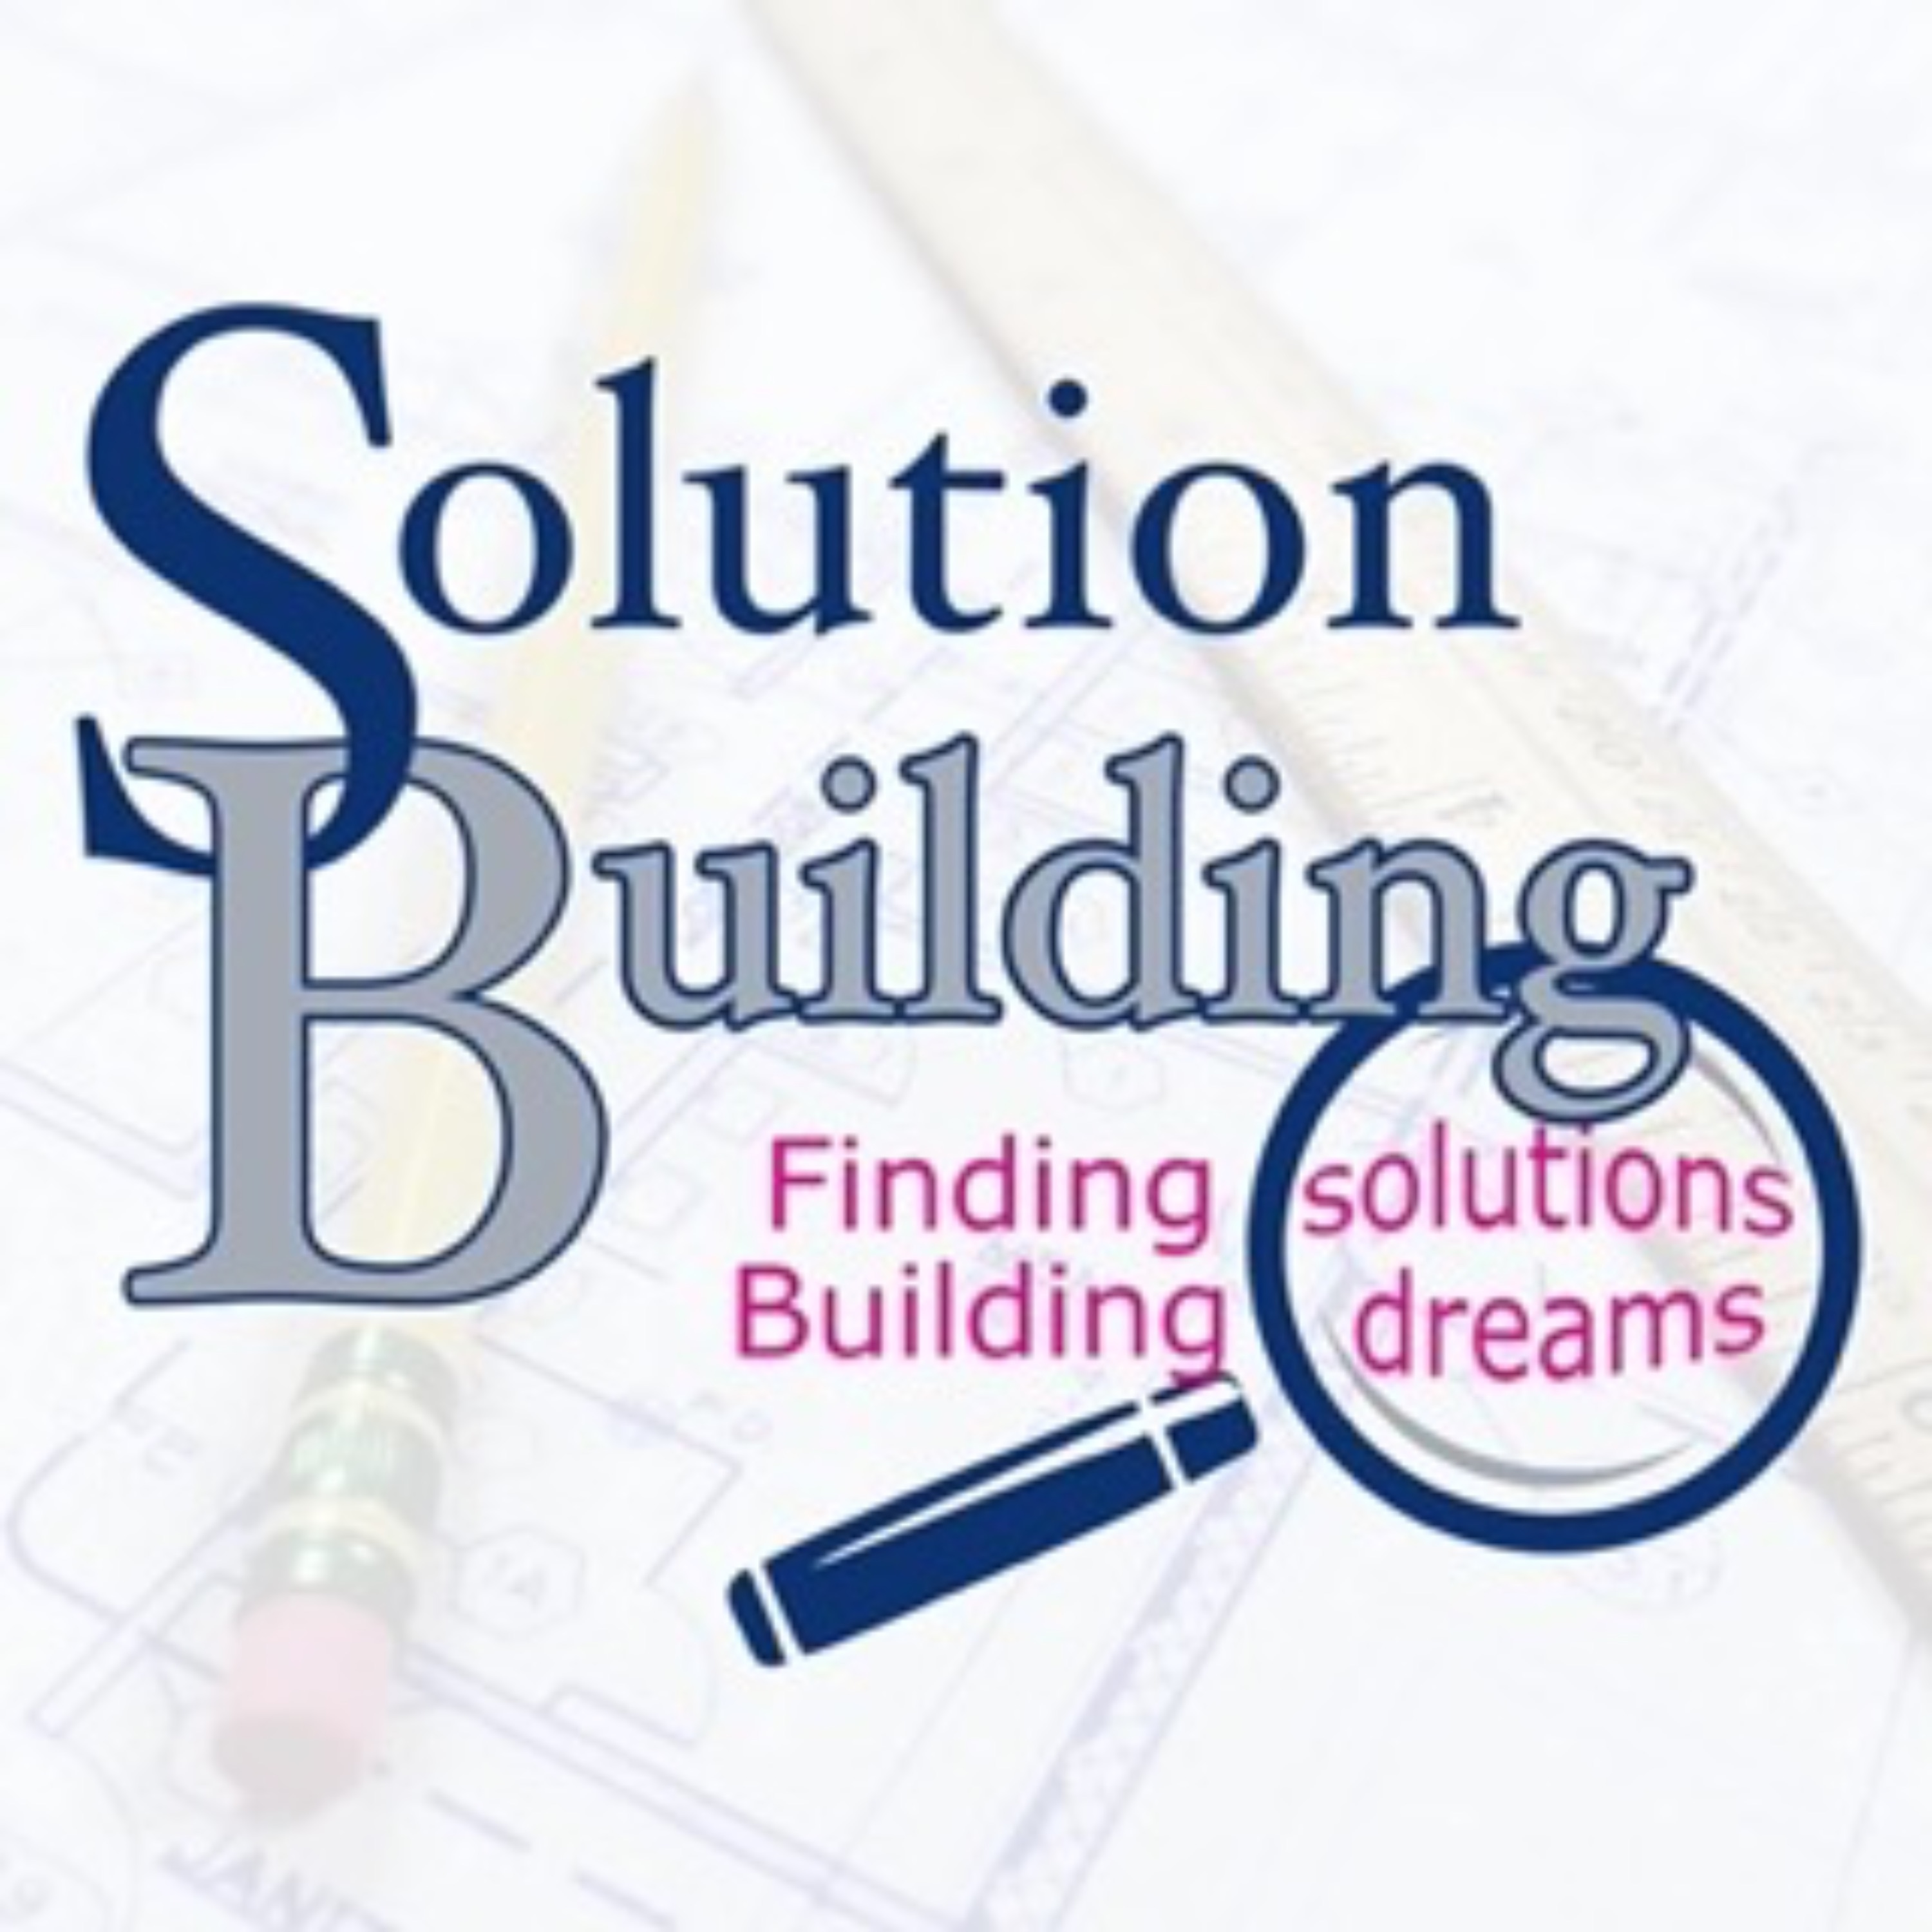 Wouldn’t You Like to BUILD Your Construction Company into Your Dream Business?